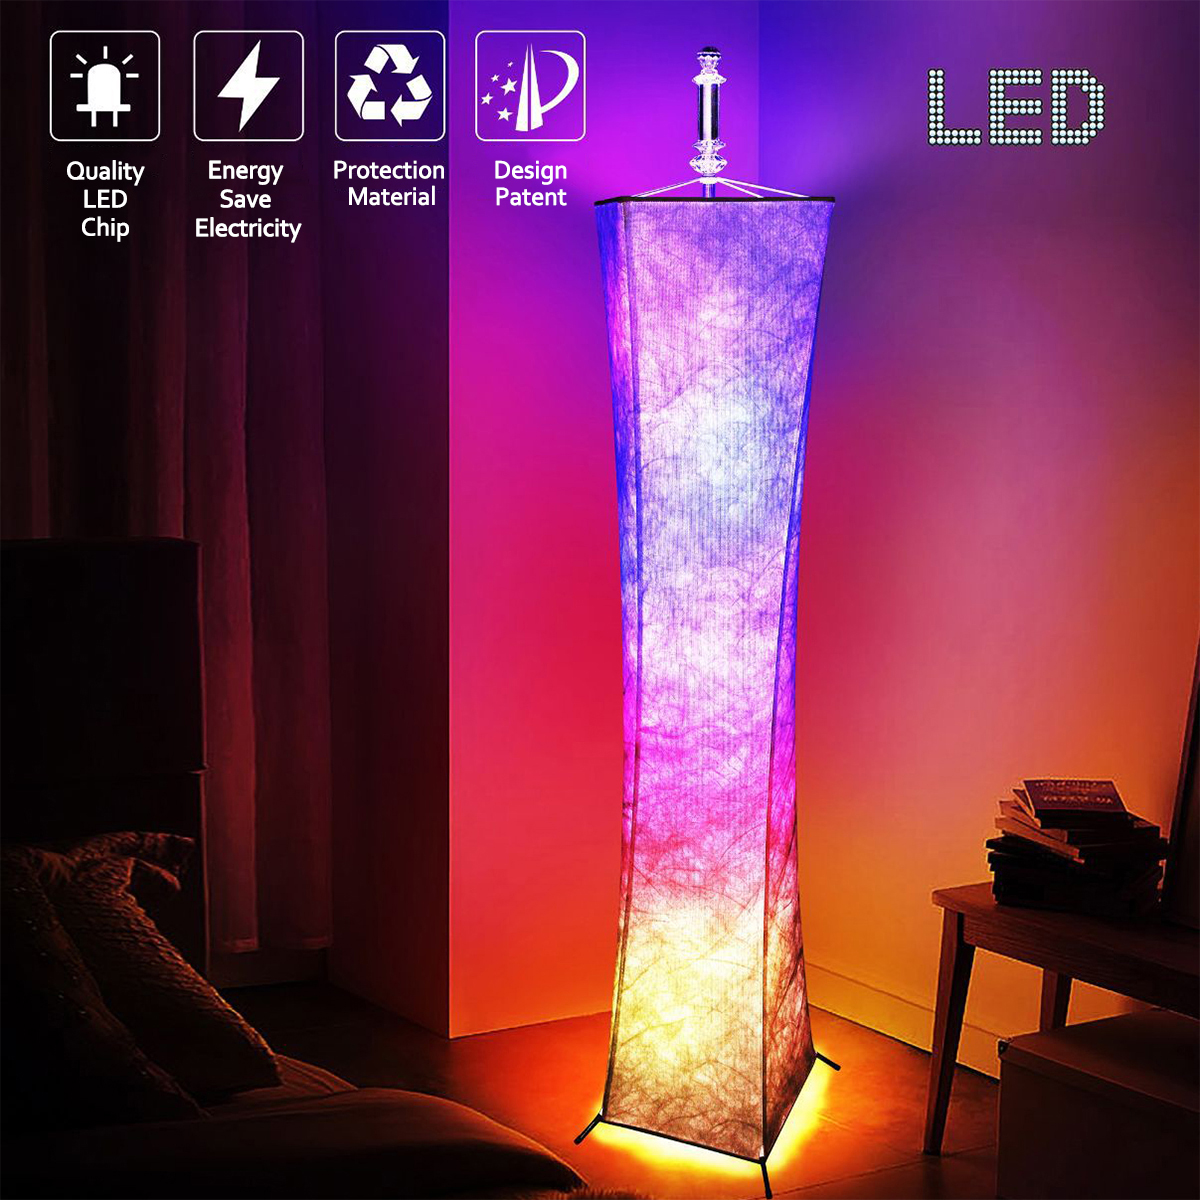 12V-LED-Floor-Lamp-Remote-Control-RGB-Color-Changing-58quot-Height-Bulbs-for-Livingroomish-1806500-1